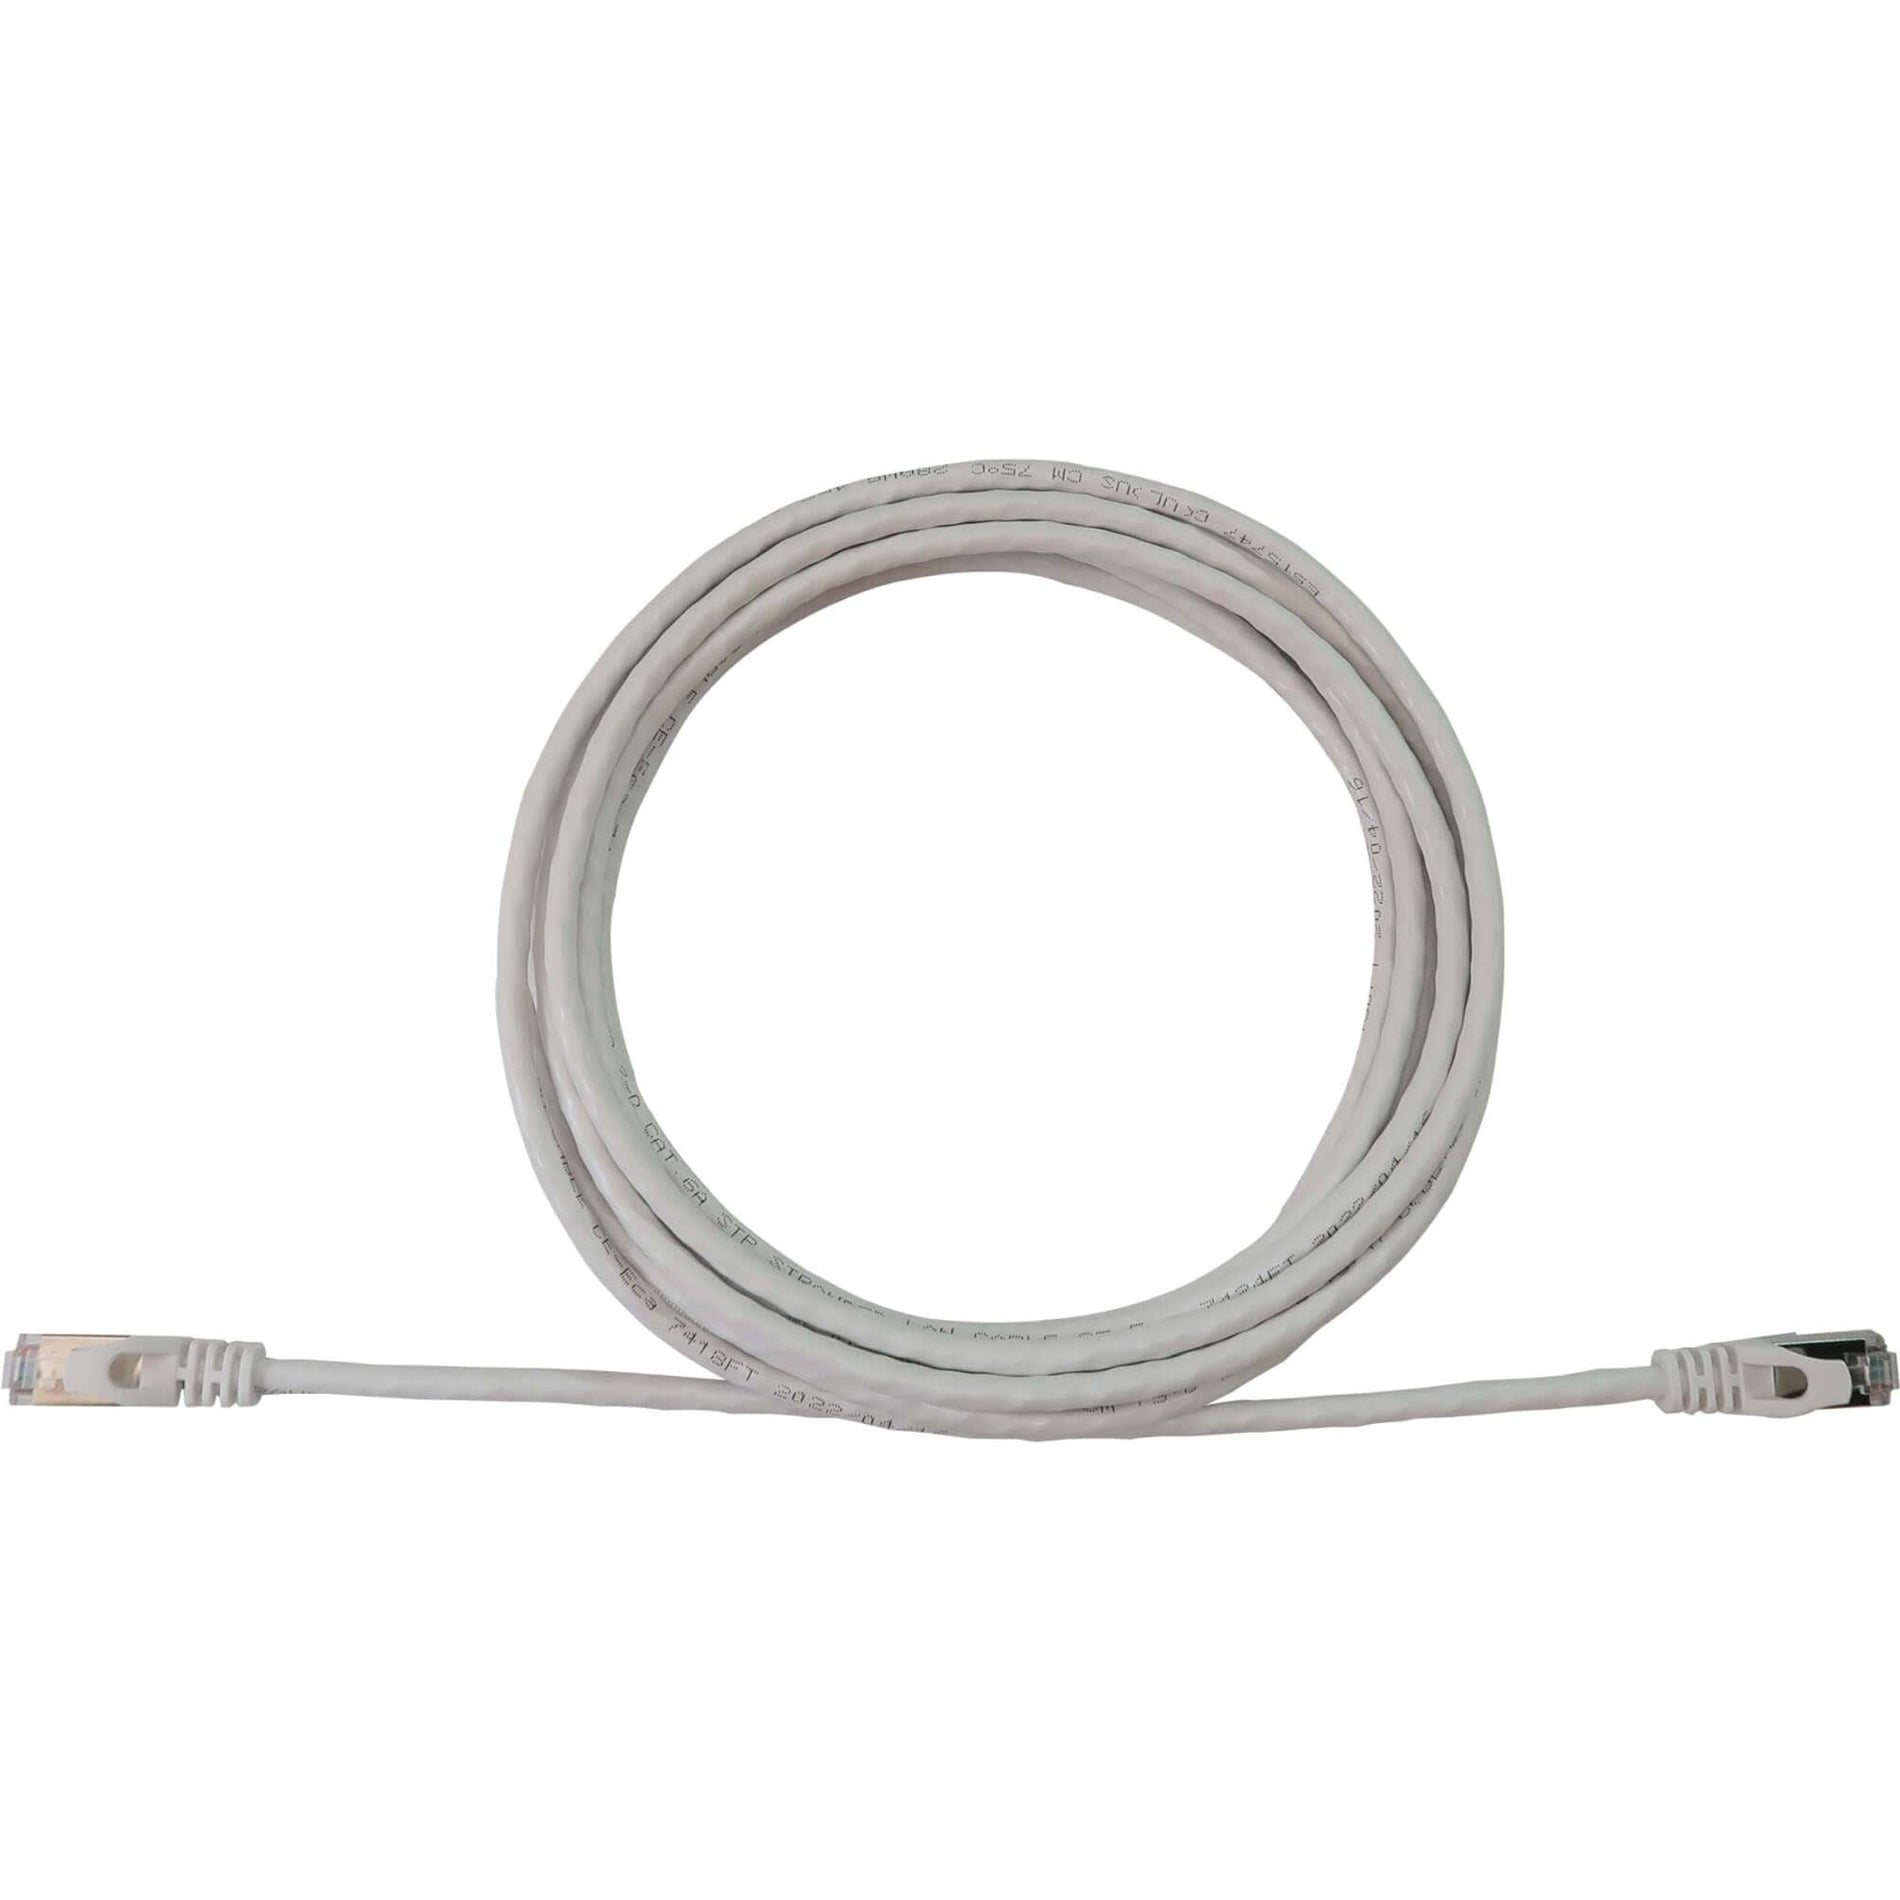 Tripp Lite N262-S10-WH Cat6a STP Patch Network Cable, 10ft, Snagless Shielded Slim 10G Ethernet Cable